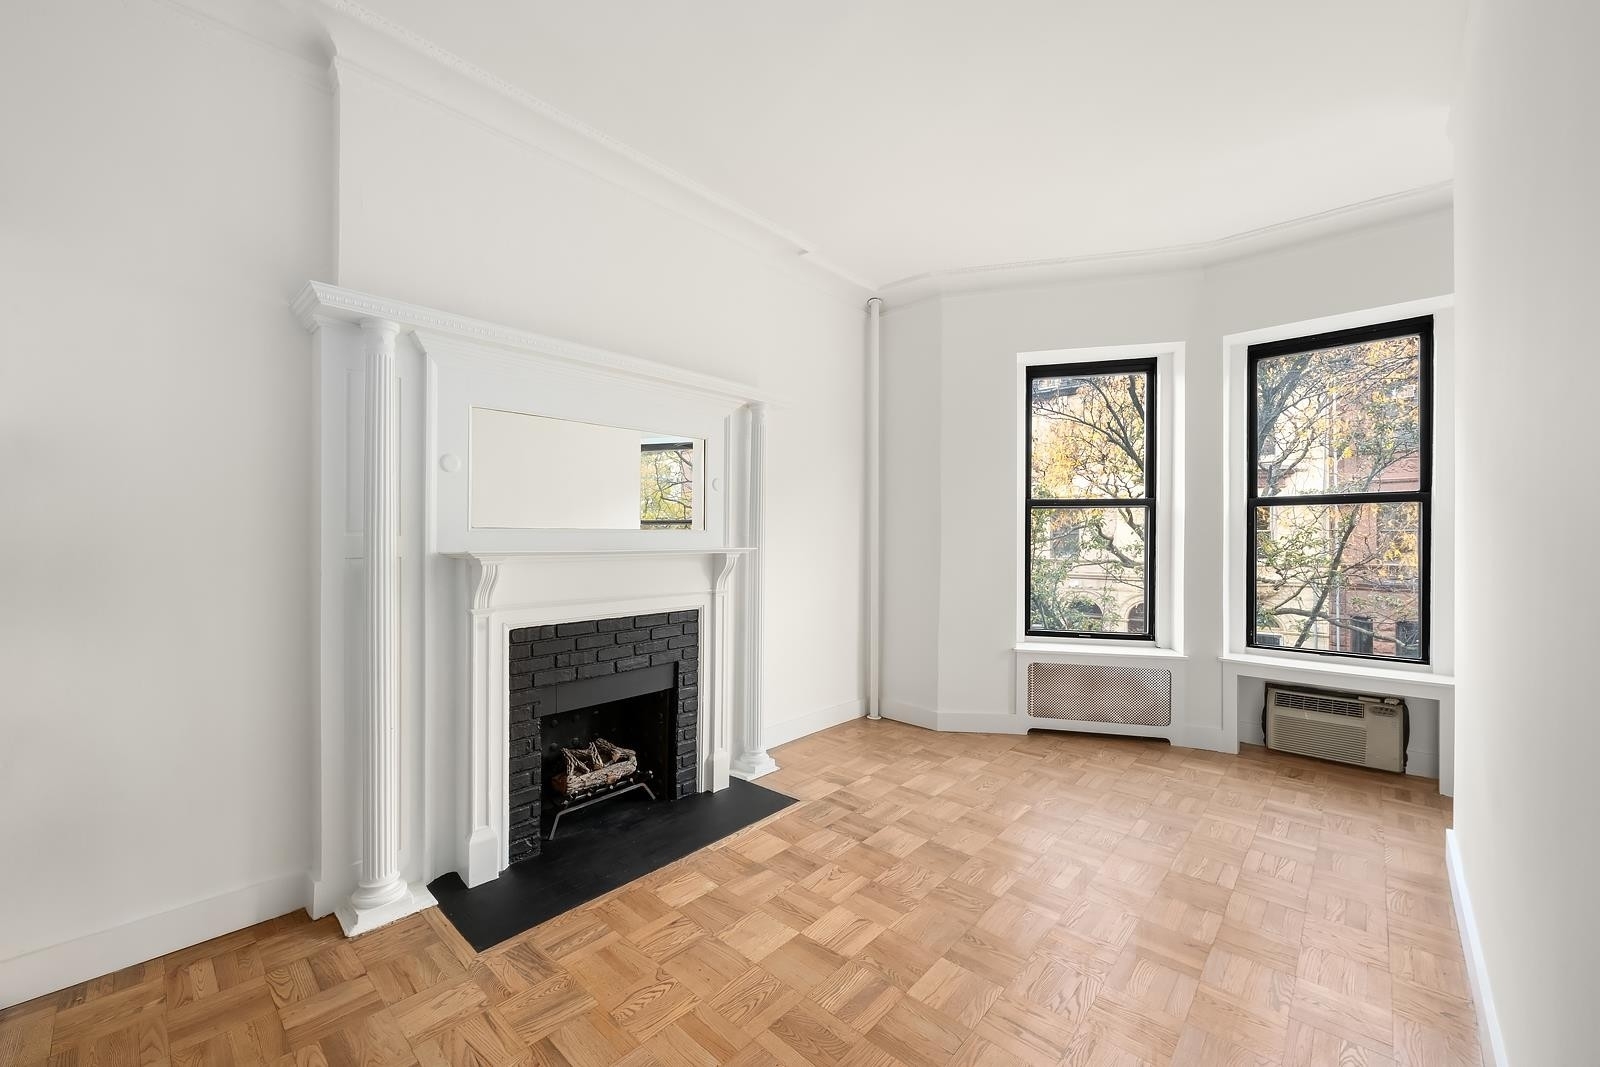 Co-op Properties for Sale at 130 W 80TH ST, 3F Upper West Side, New York, New York 10024